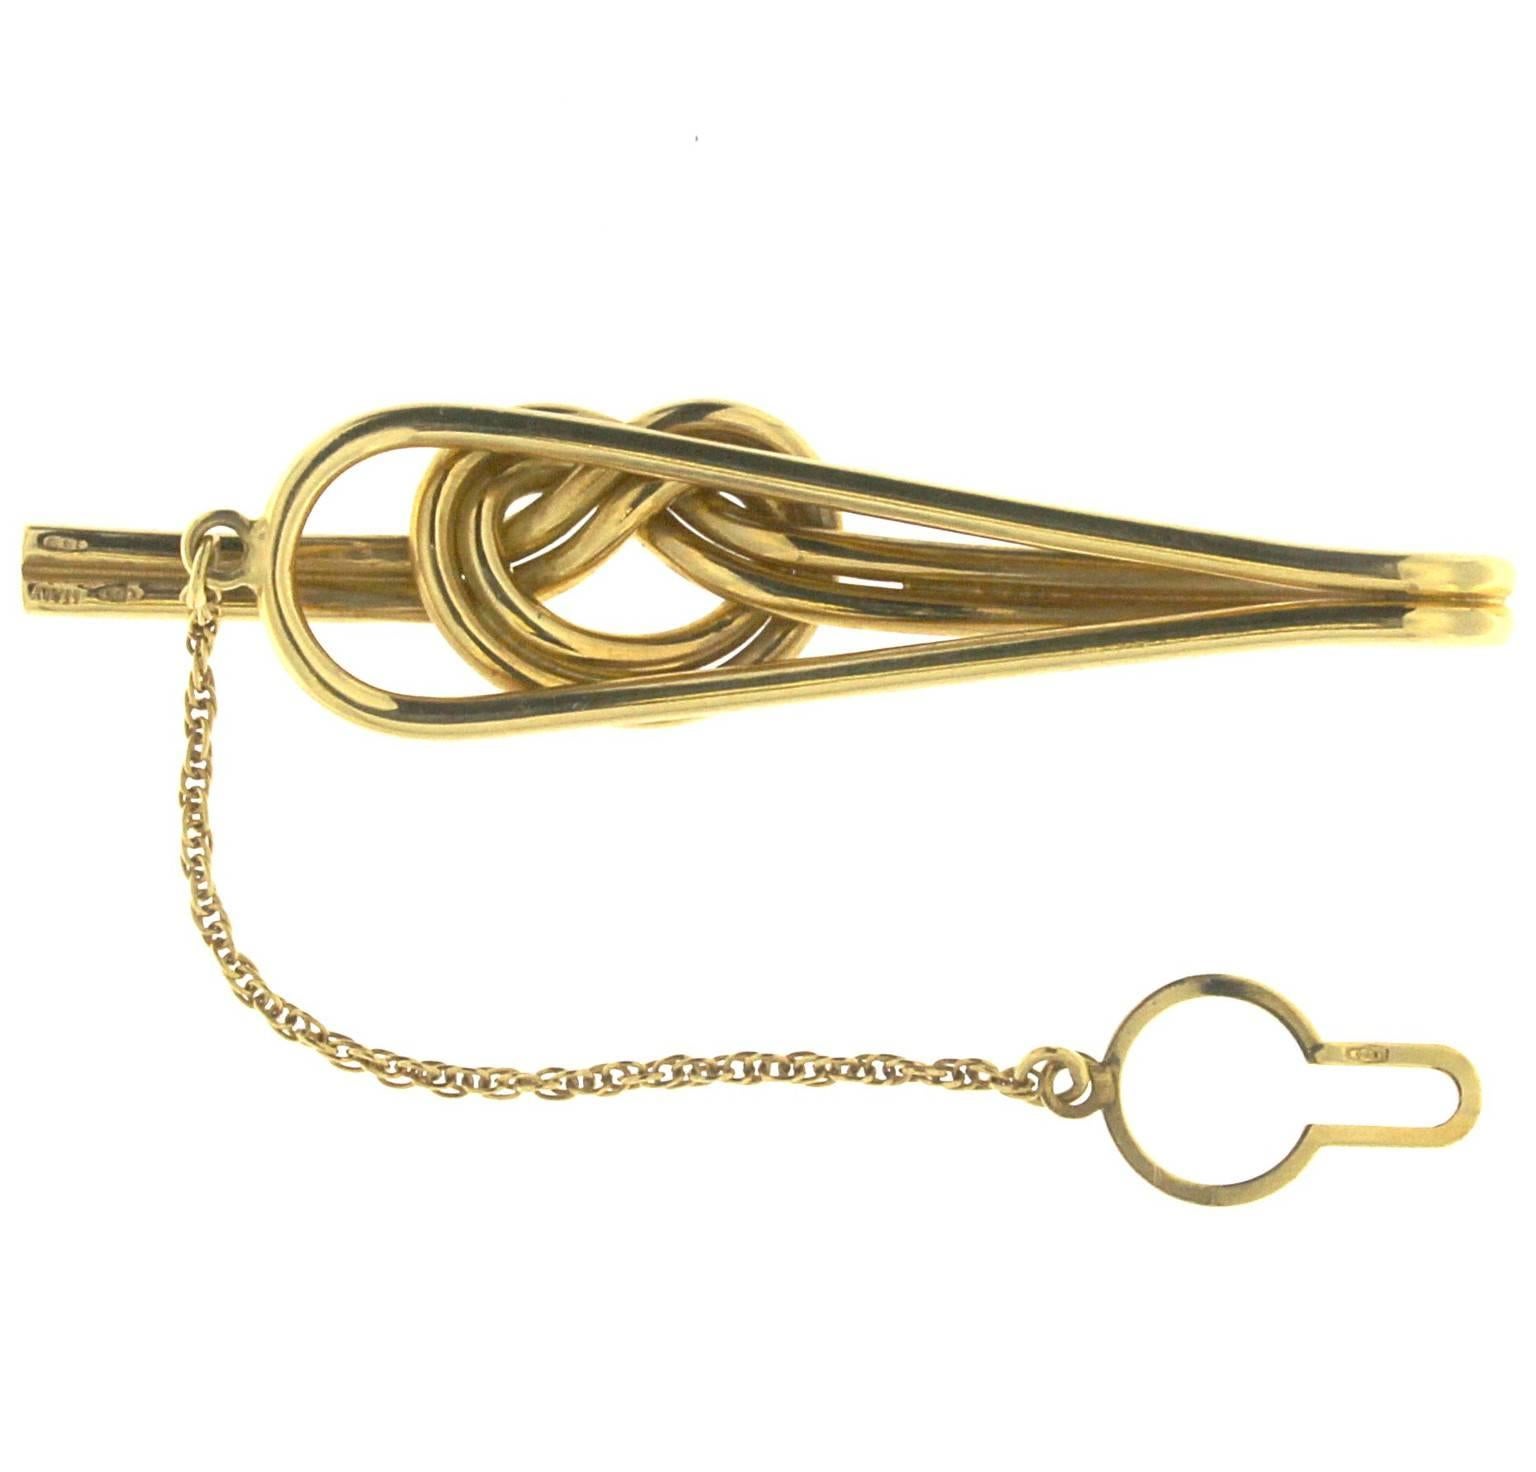 The Tie clip has been realized with 2 lines of yellow 18 kt gold mm 2.00 with a delicate chain (6 cm long) and at the end a classic button attachment 
Total 18kt gold weight: gr 16.90
Stamp: 10MI, 750
